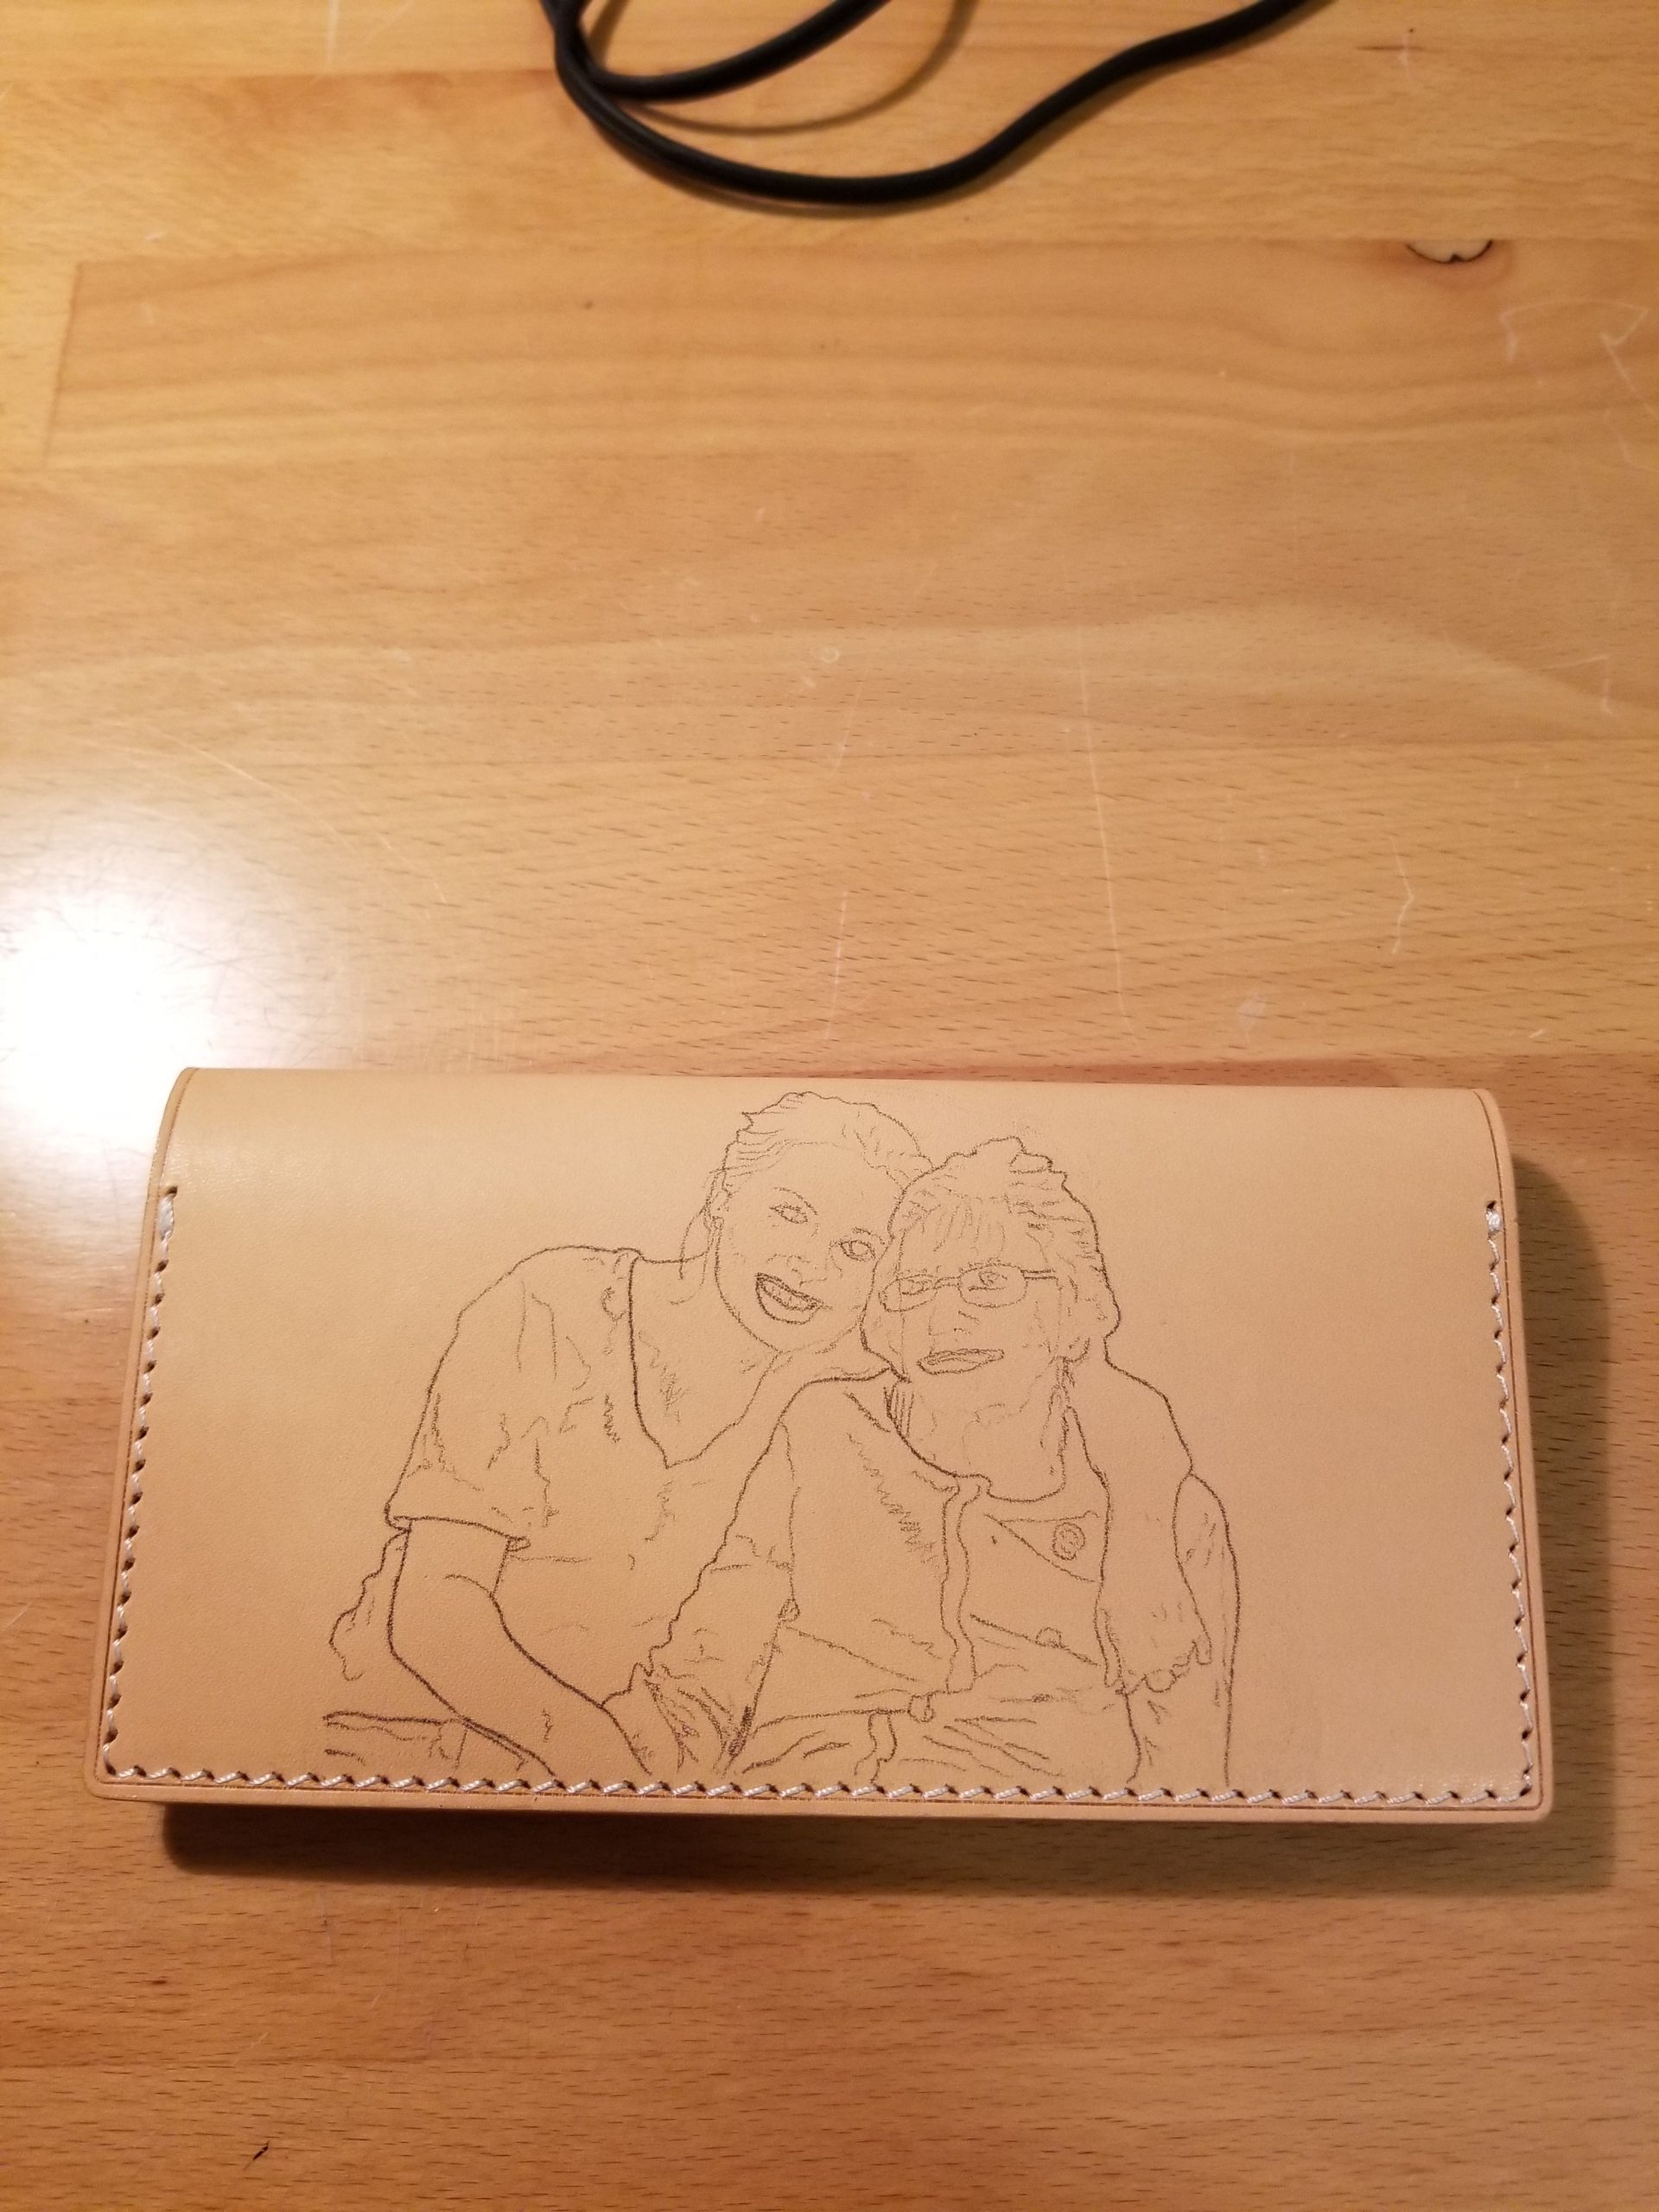 Art Transfer on Second and Final Vegetable Tanned Leather Wallet